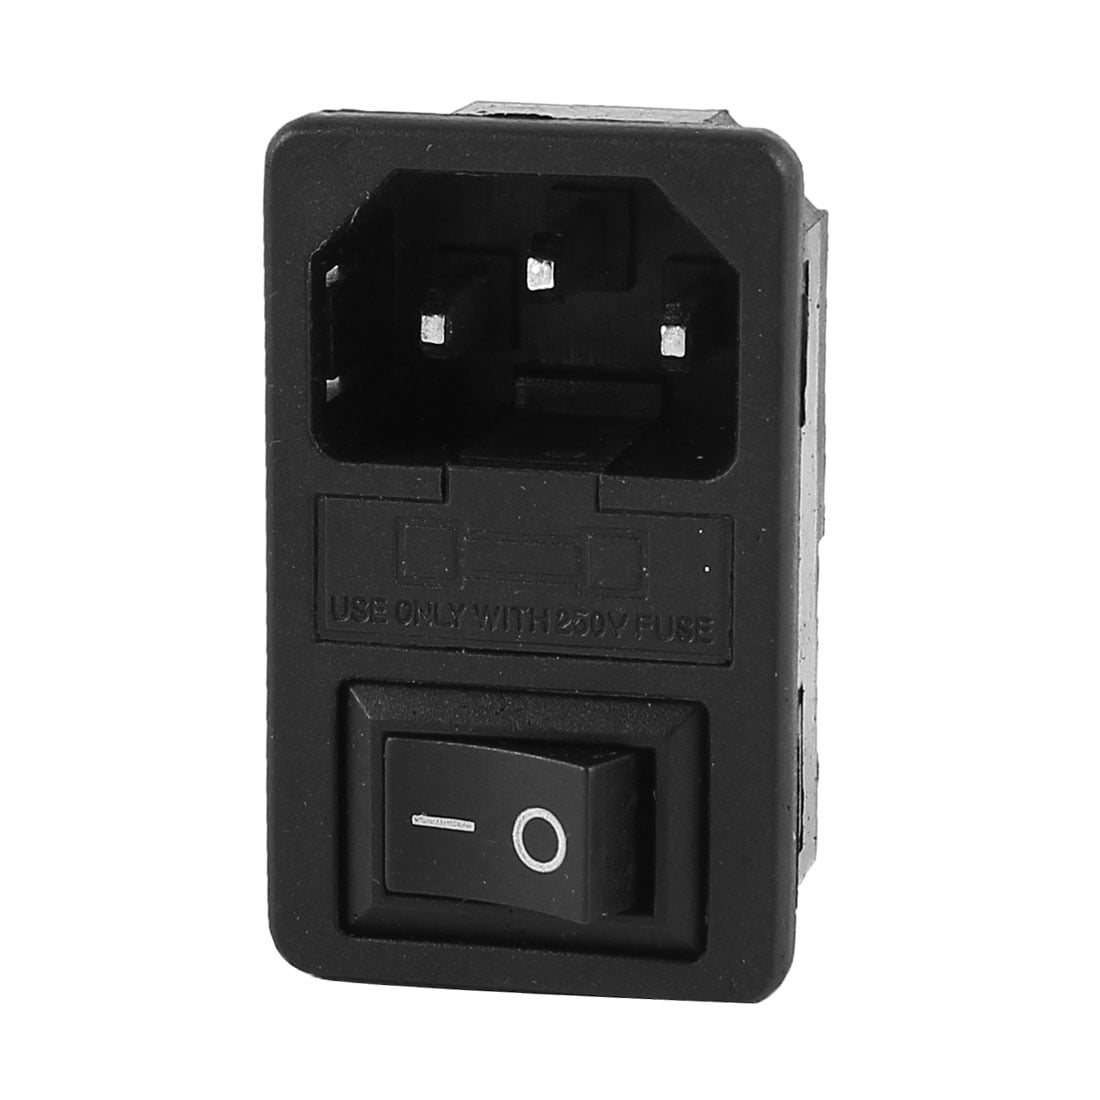 IEC320 C14 Male Power Socket with Fuse 3 Pin Rocker Switch Connector Plug